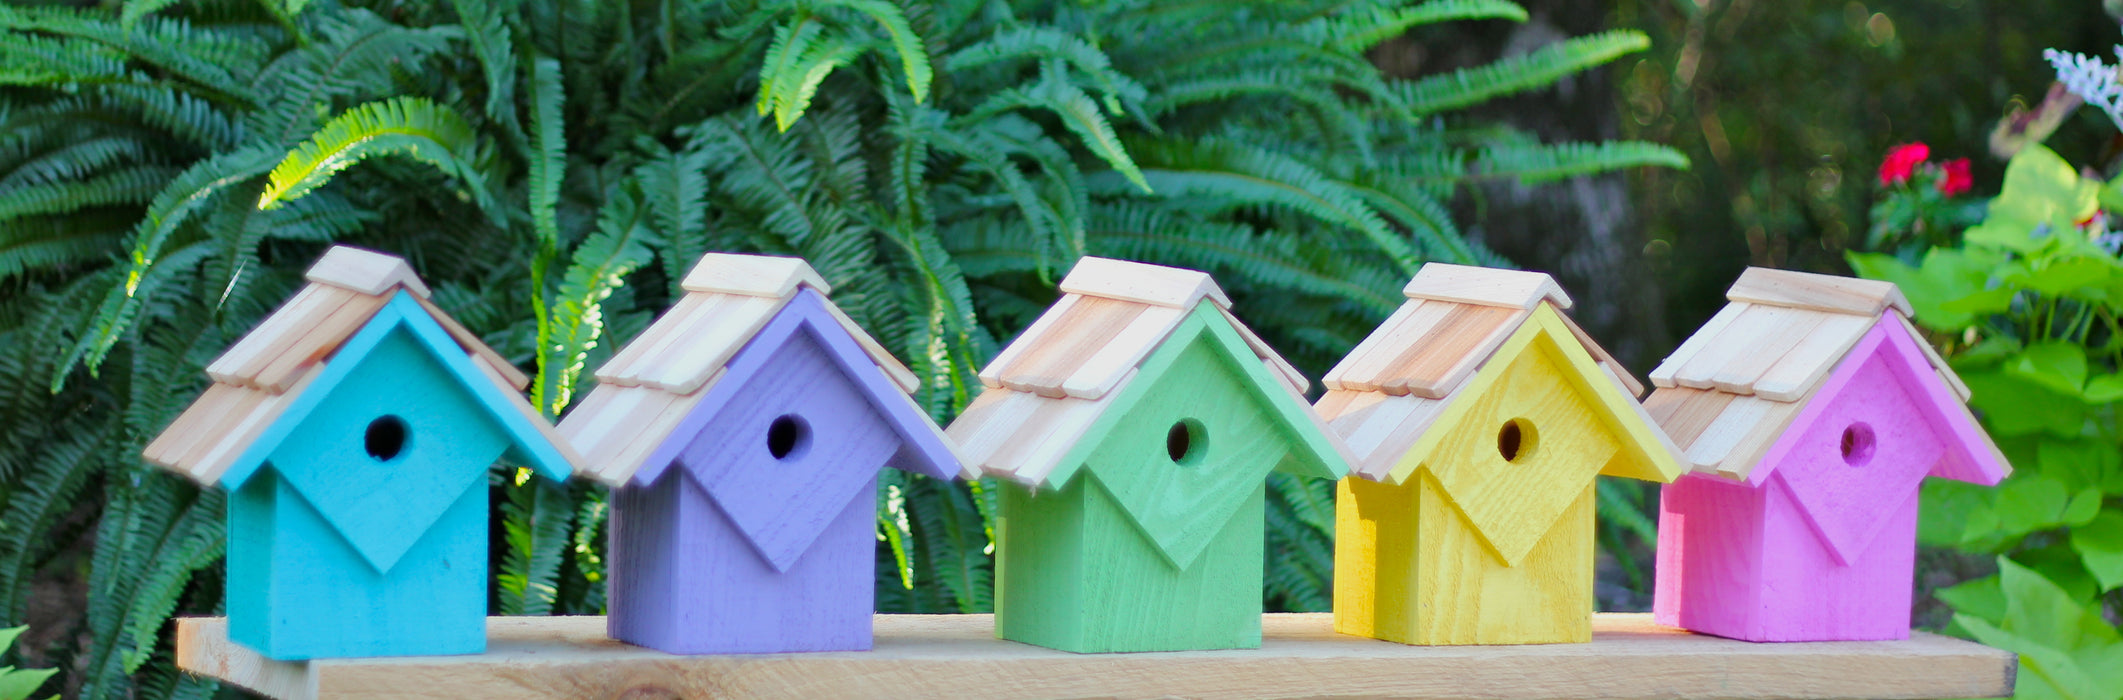 Summer Home Bird House - assorted colors (pink, green, yellow, turqoise, purple)